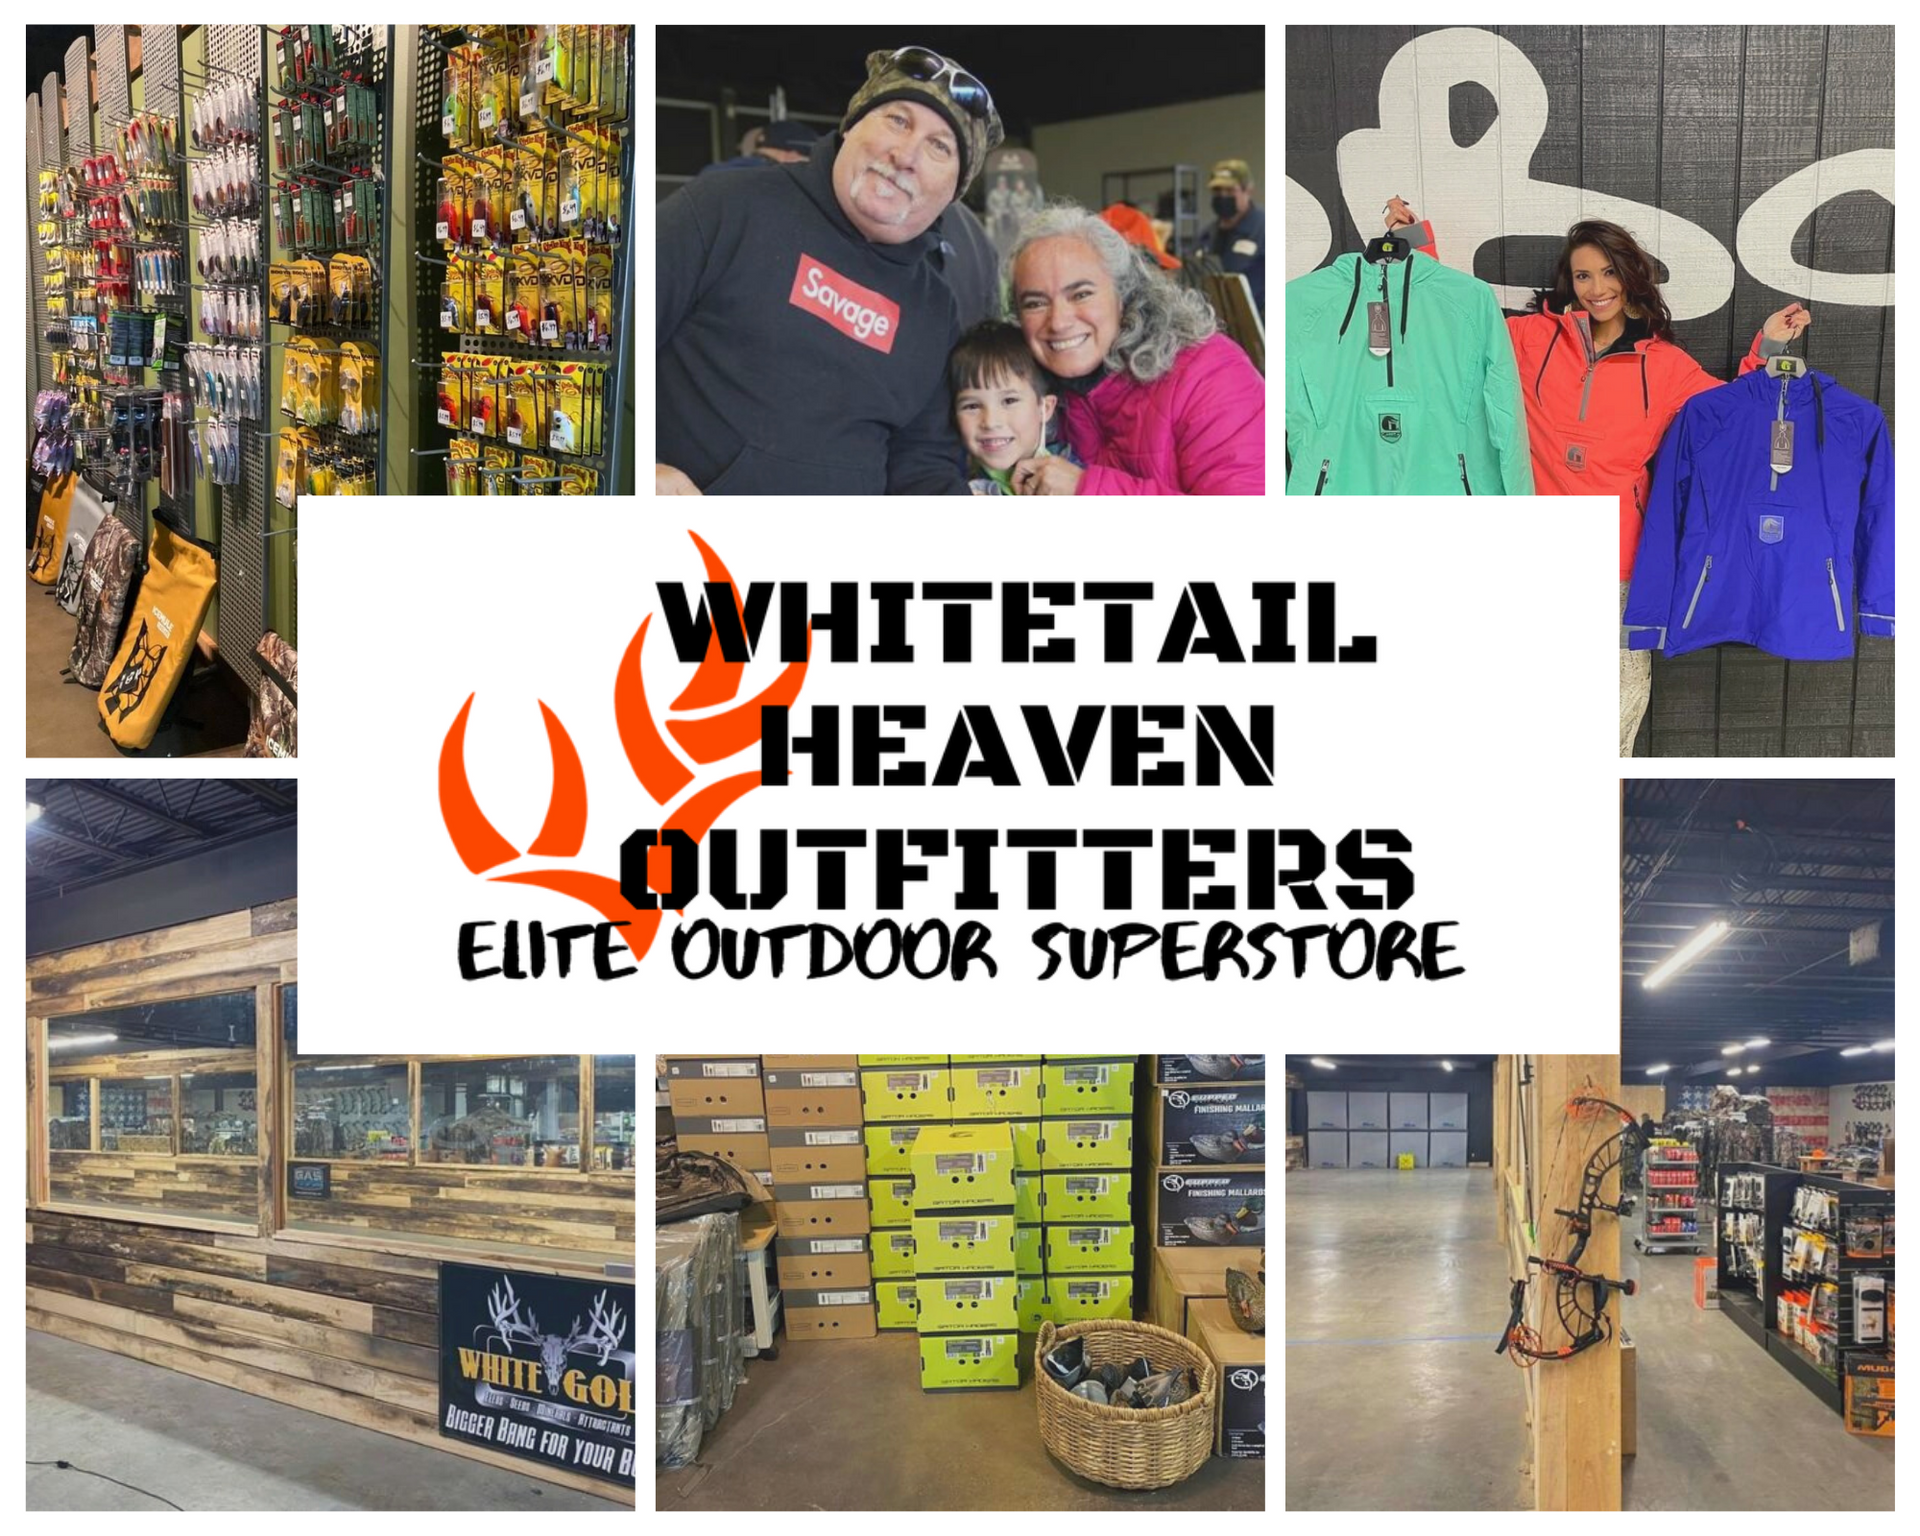 Load video: Visit Whitetail Heaven Outfitters Elite Outdoor Superstore for all your Hunting Gear!